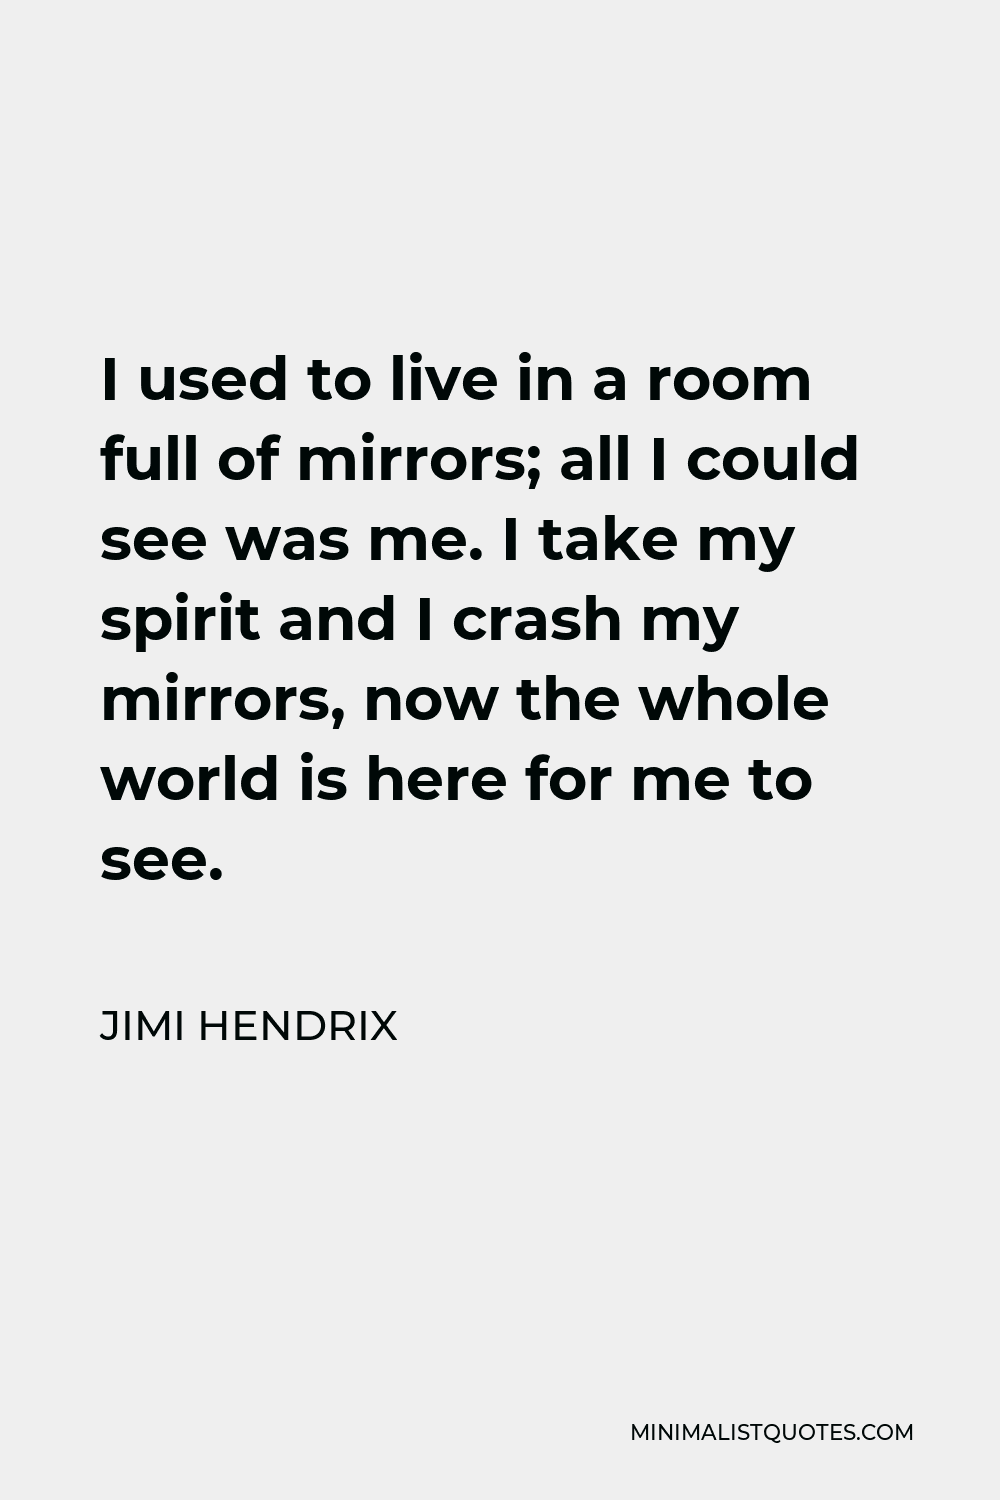 Jimi Hendrix Quote - I used to live in a room full of mirrors; all I could see was me. I take my spirit and I crash my mirrors, now the whole world is here for me to see.